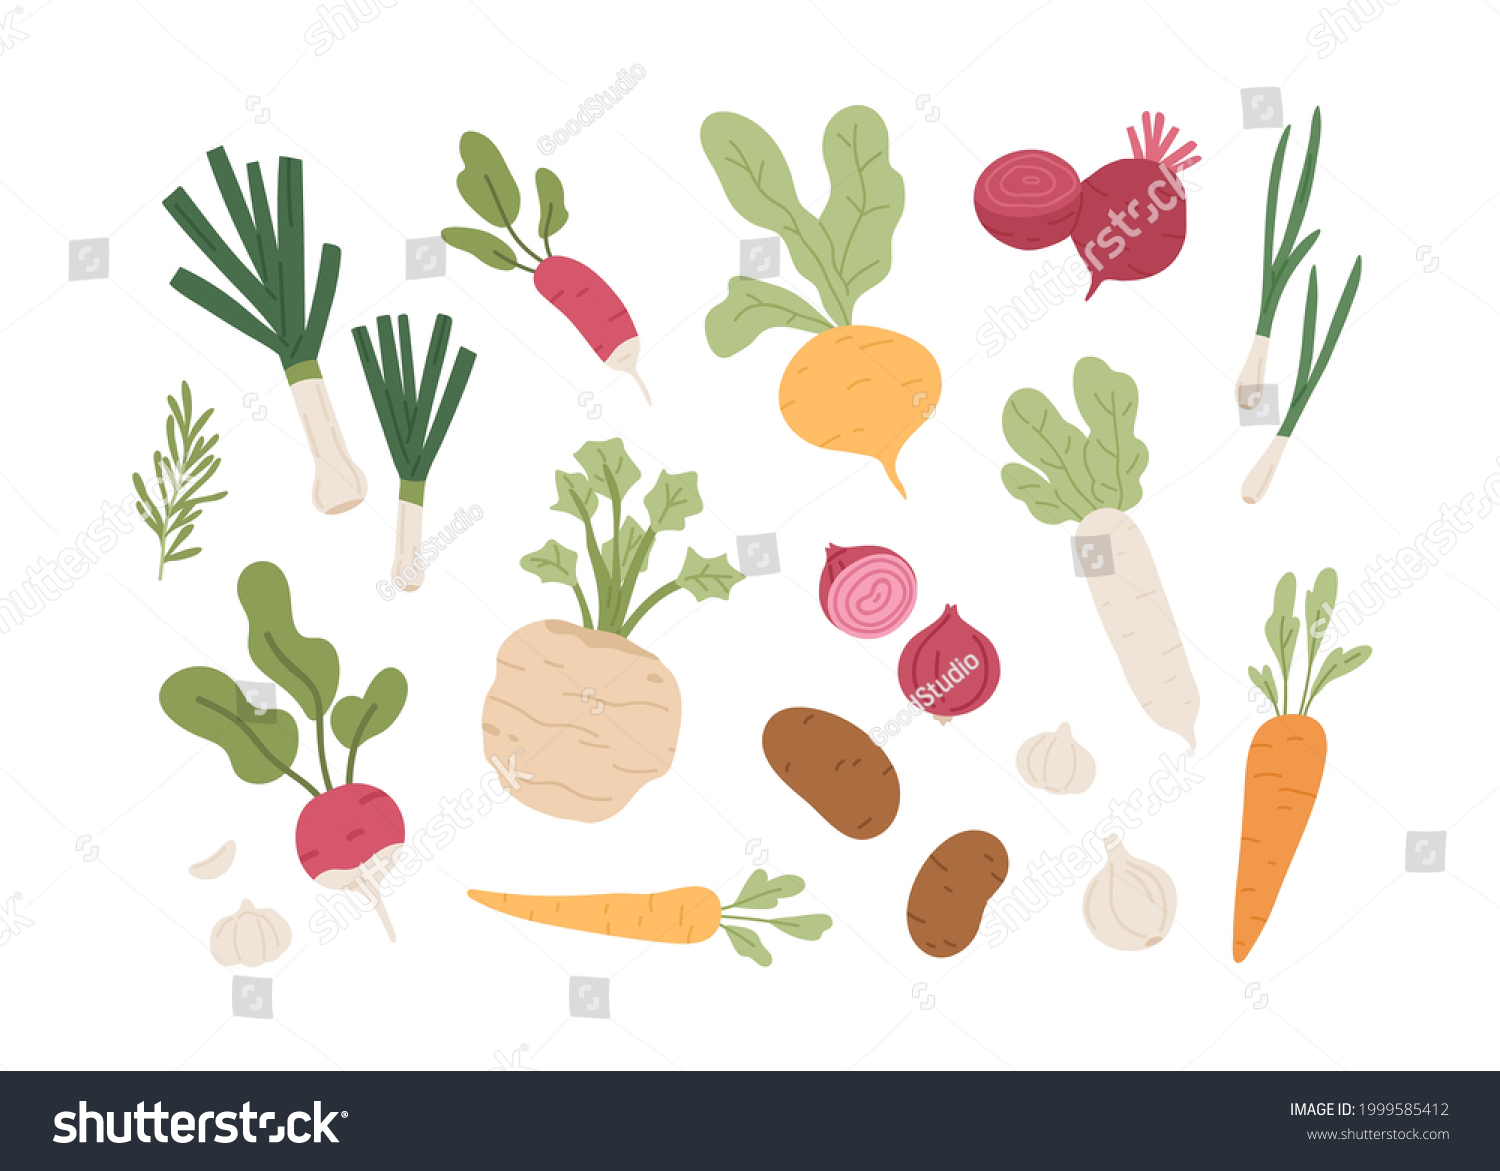 Fresh organic root vegetables. Set of healthy farm food. Carrot, onion, radish, daikon, garlic, beet and potato tubers. Summer harvest. Colored flat vector illustration isolated on white background #1999585412